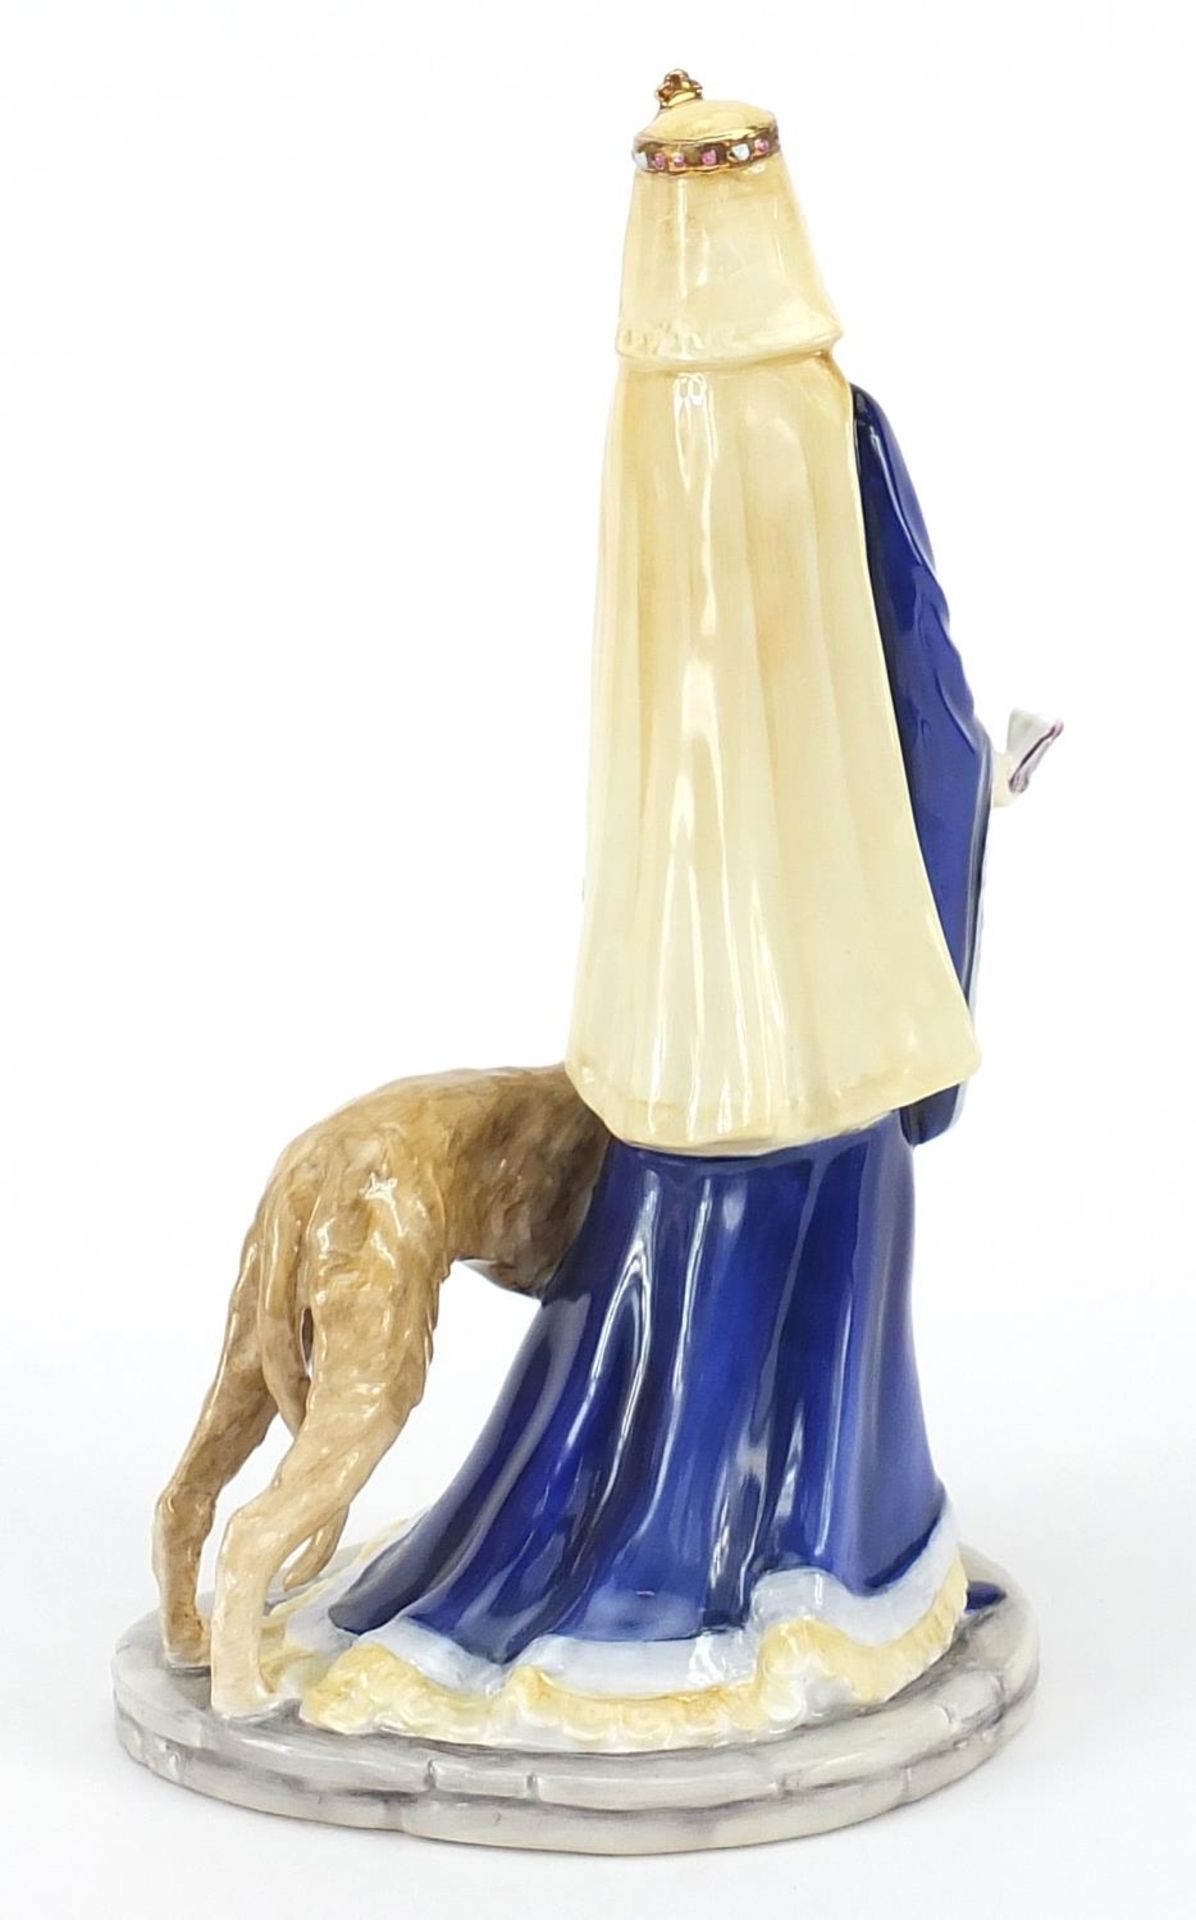 Royal Doulton figurine Eleanor of Aquitaine HN3957 with stand and box, 59/5000, the figurine 24cm - Image 2 of 5